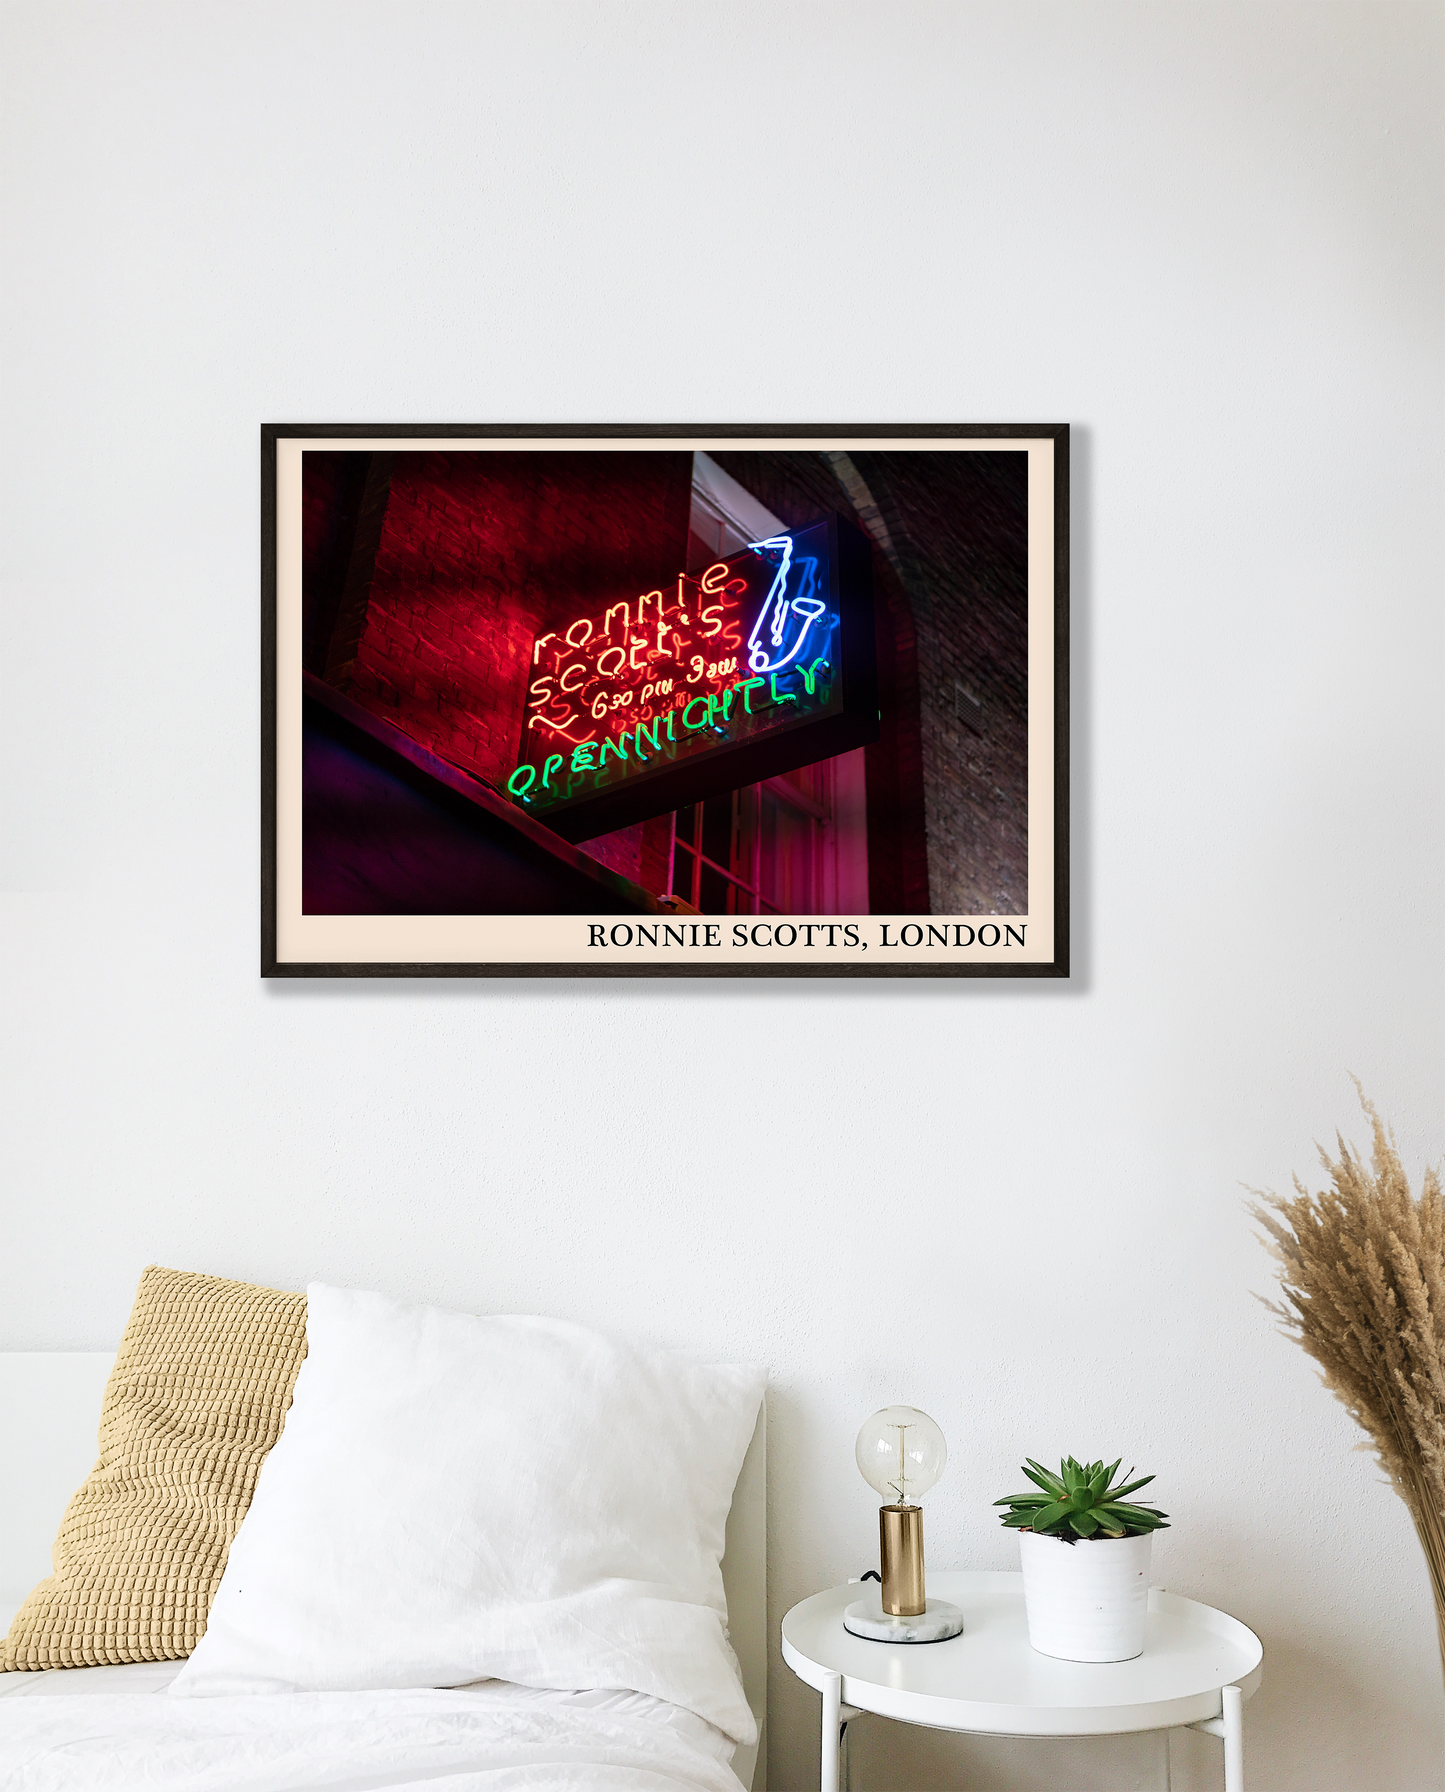 Iconic photo of Ronnie Scotts jazz club in London. Picture crafted into a cool black framed music poster, with an off-white border. Poster is hanging on a white bedroom wall